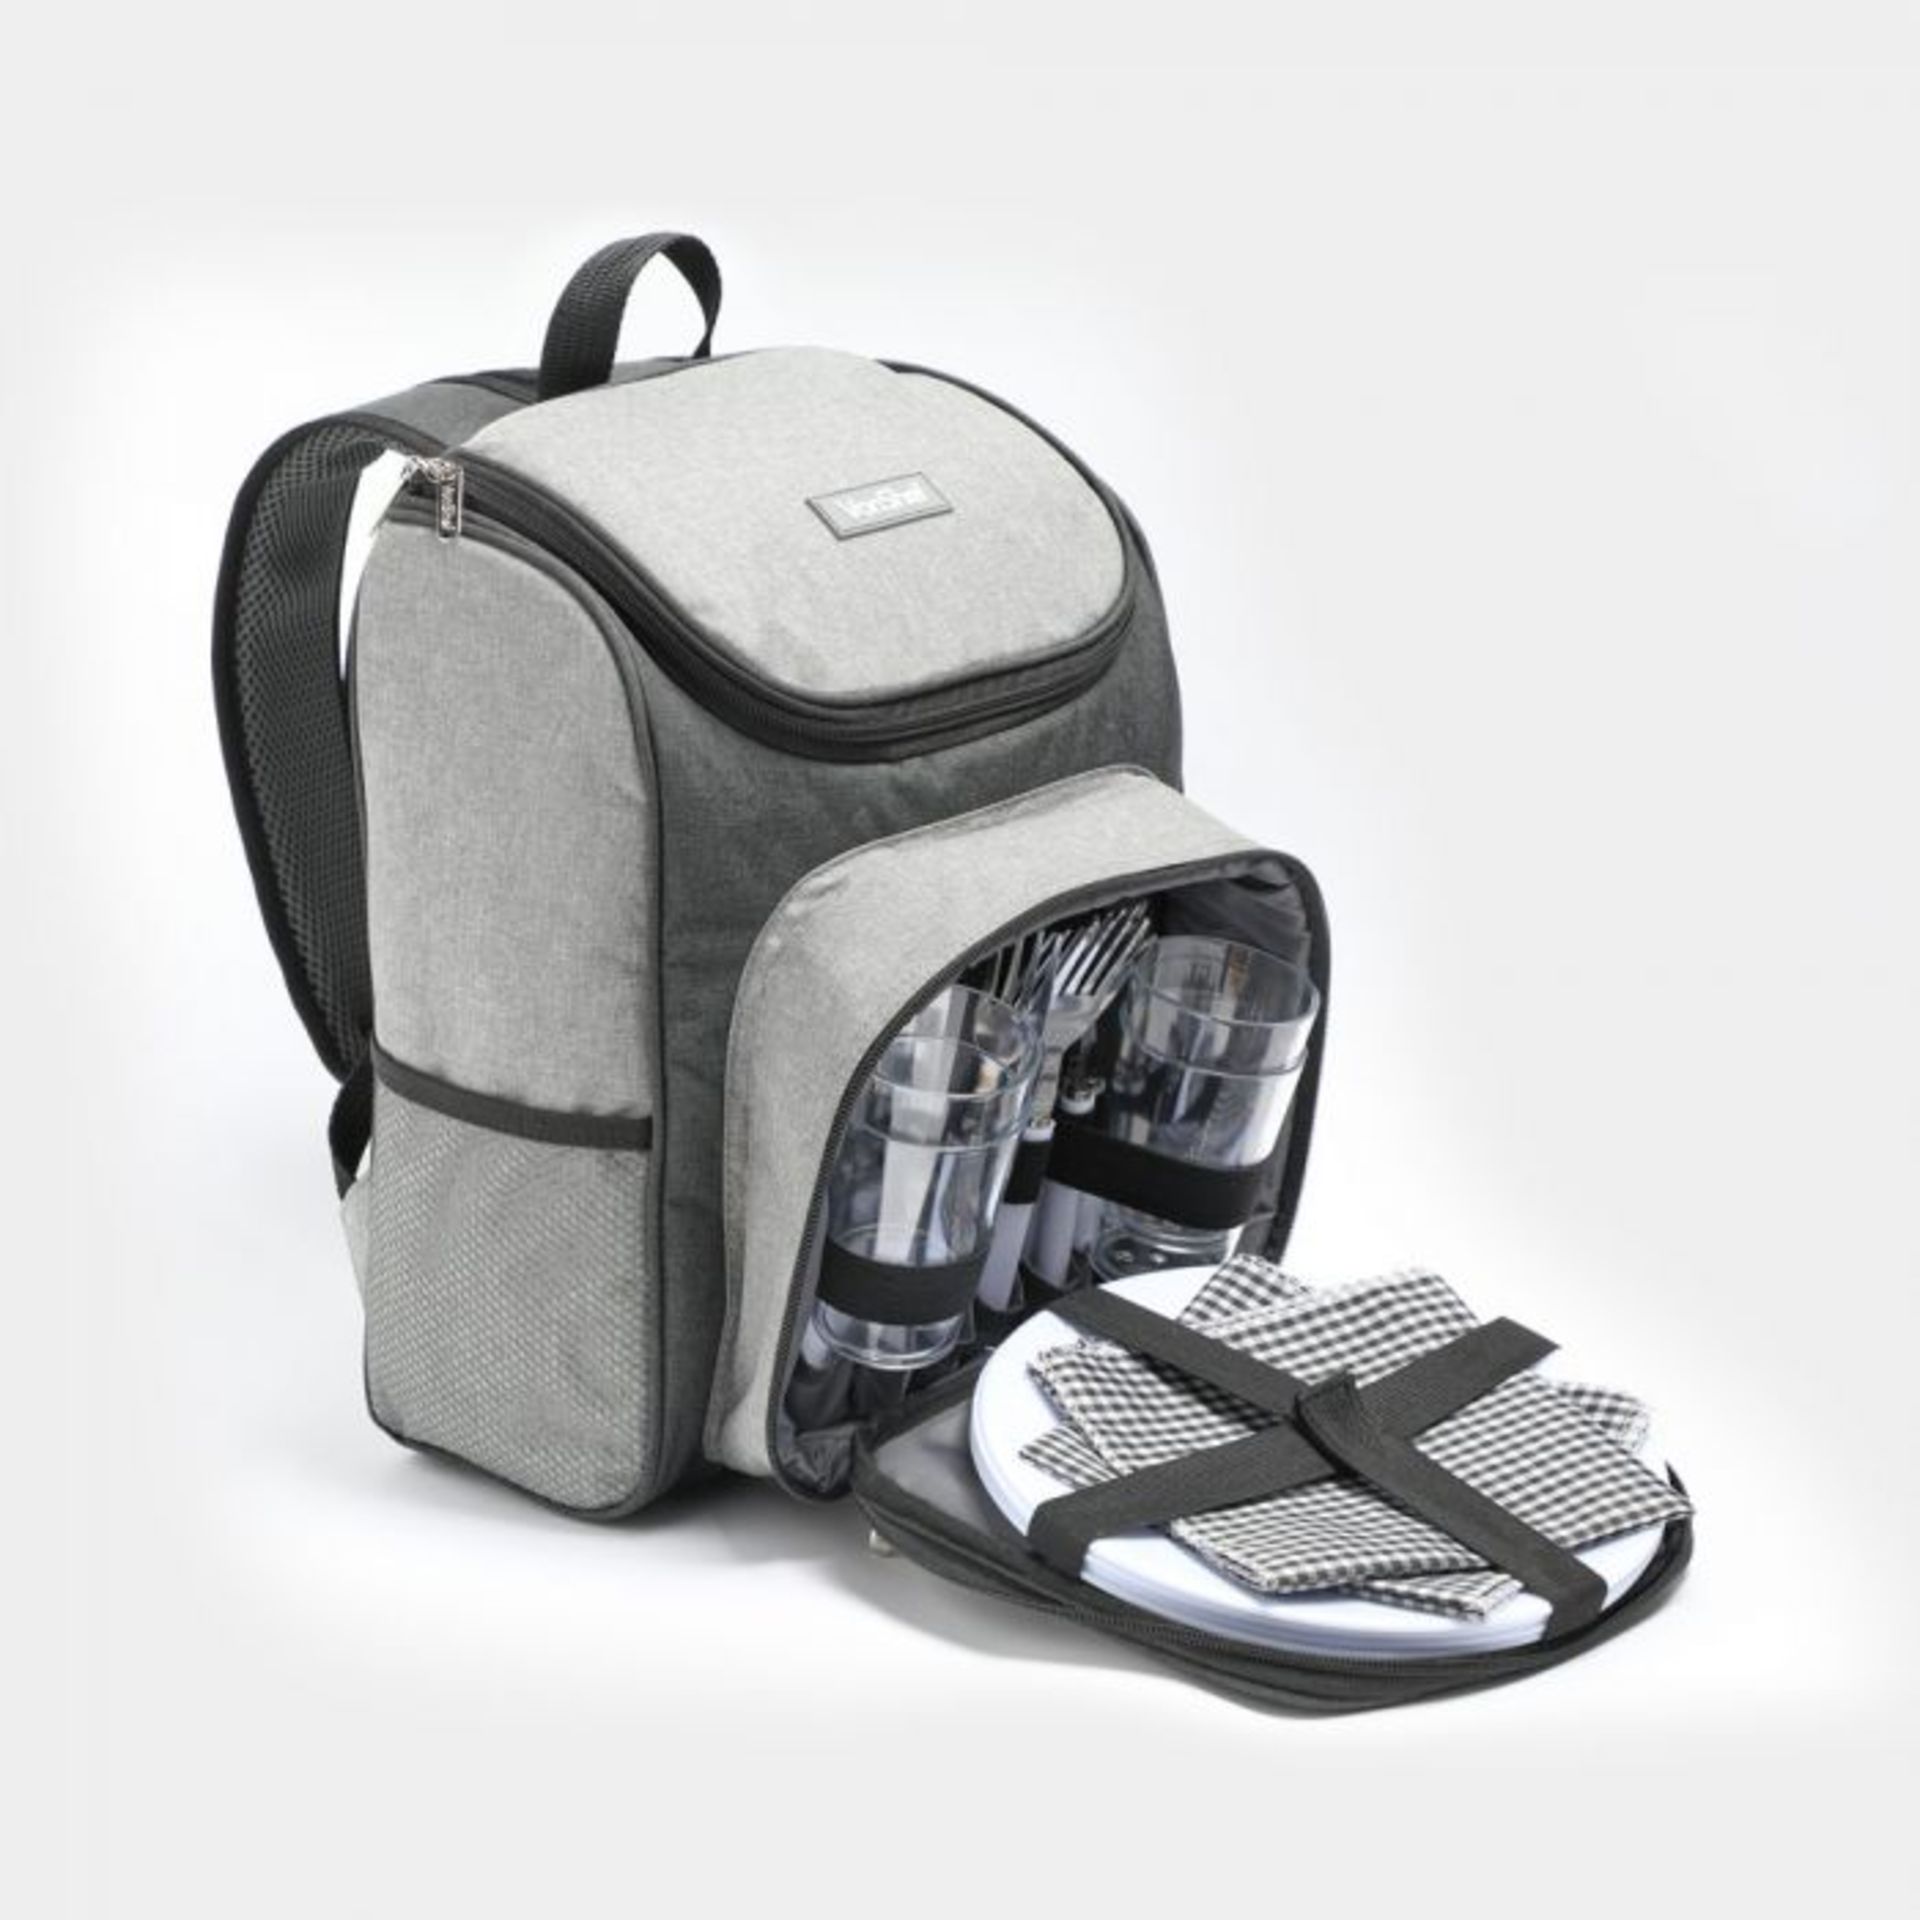 Picnic backpack - 4 Person.